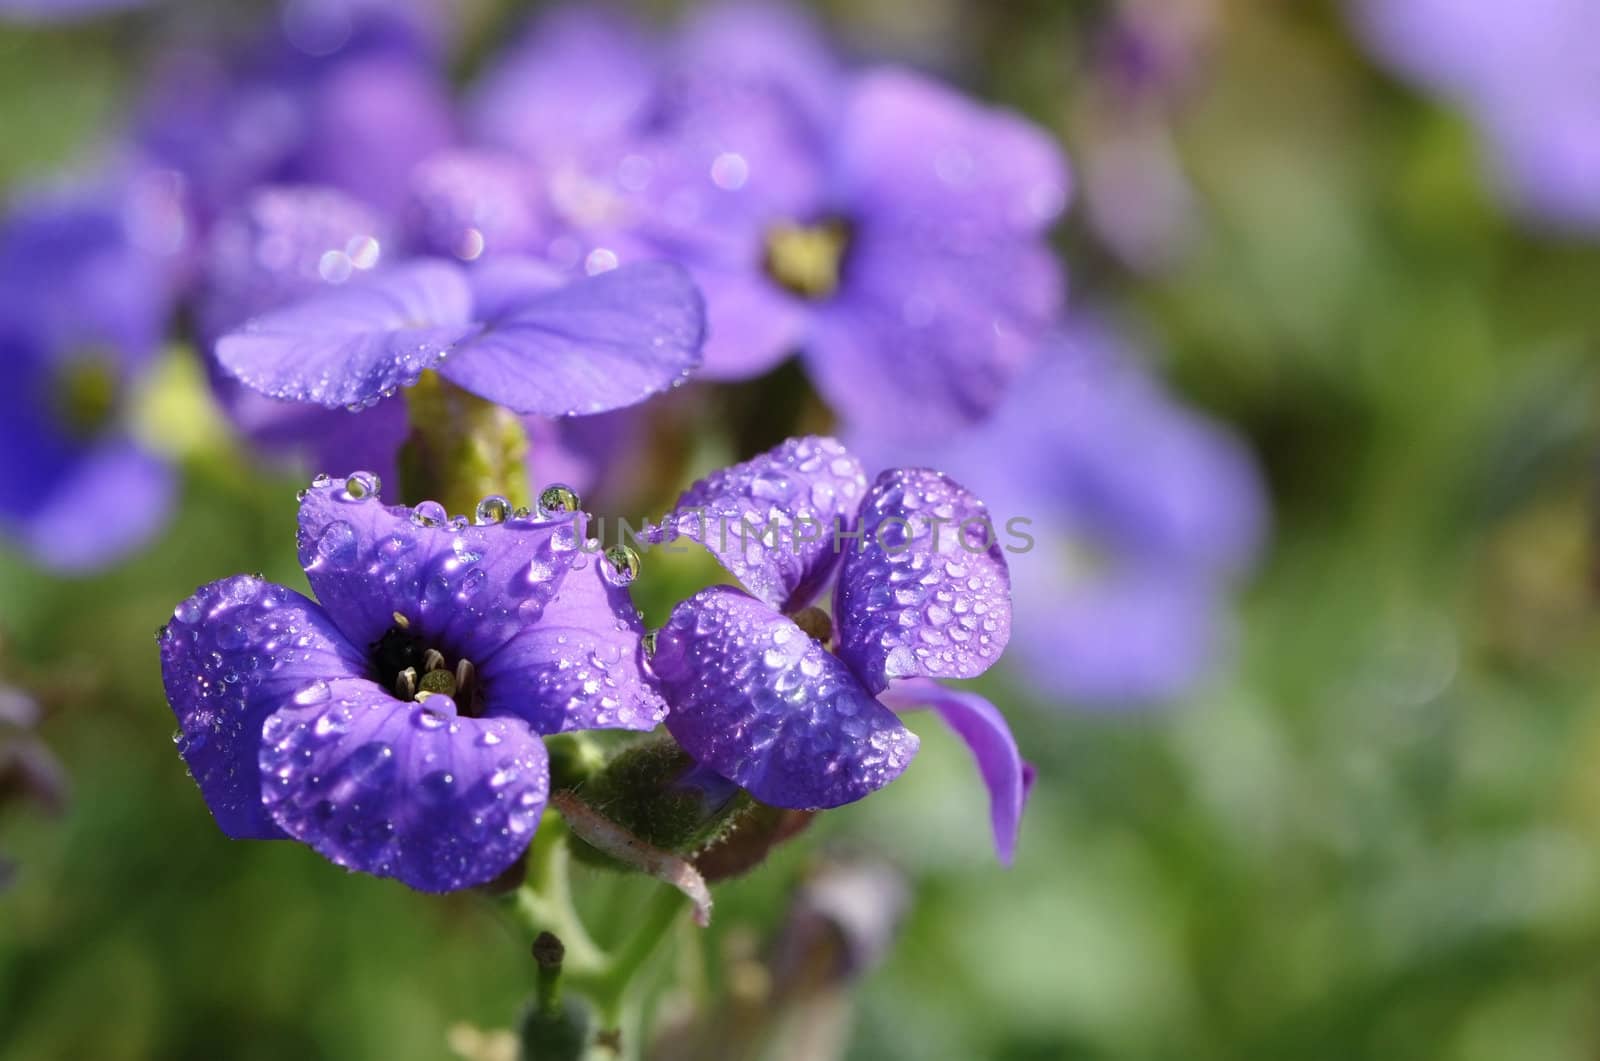 Water Droplets on Purple Flowers with a Blurred Background